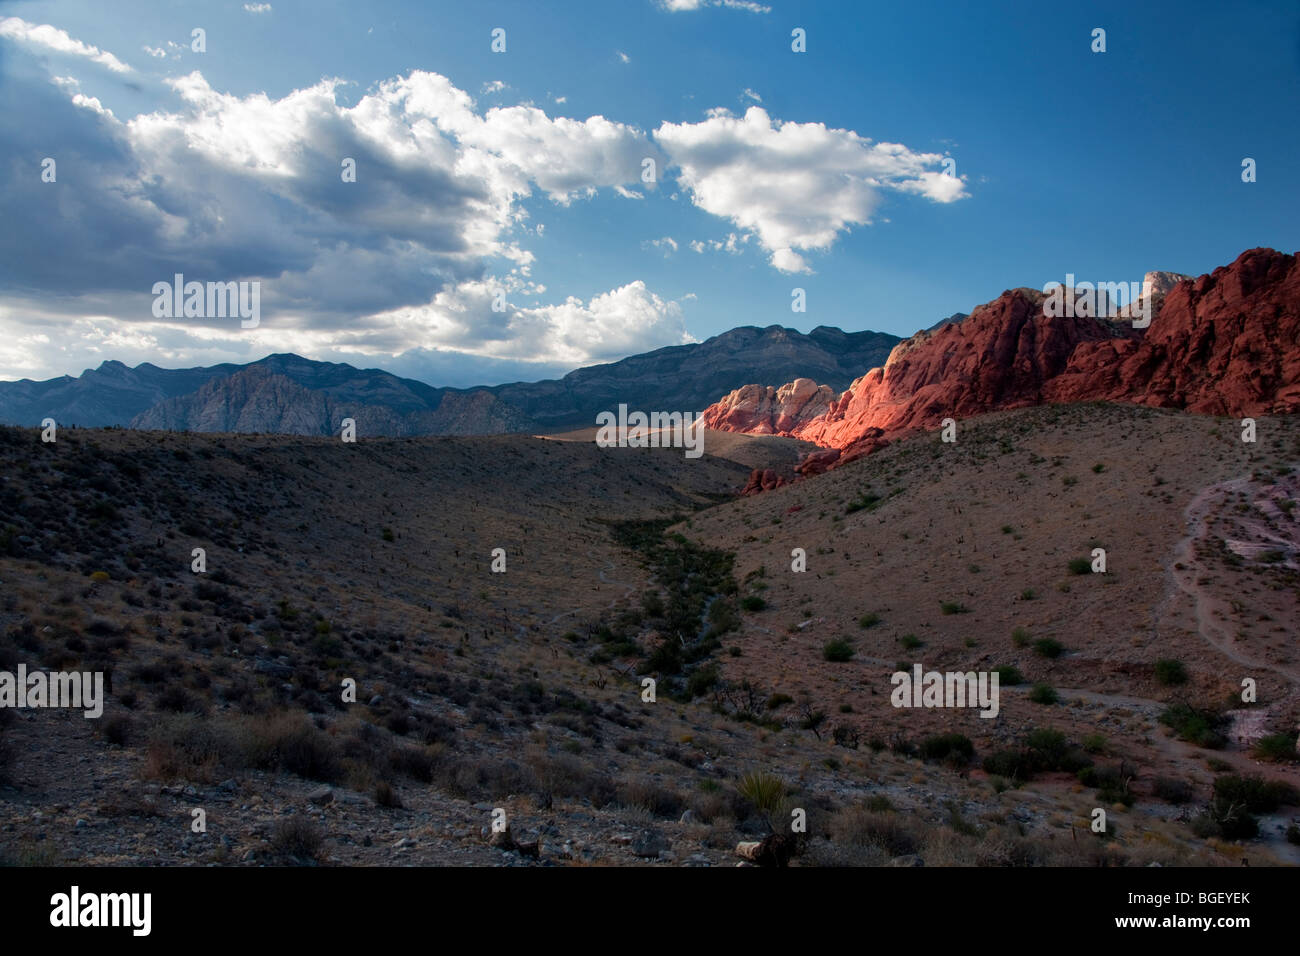 Rock formations in Red Rock Canyon National Conservation Area, Nevada Banque D'Images